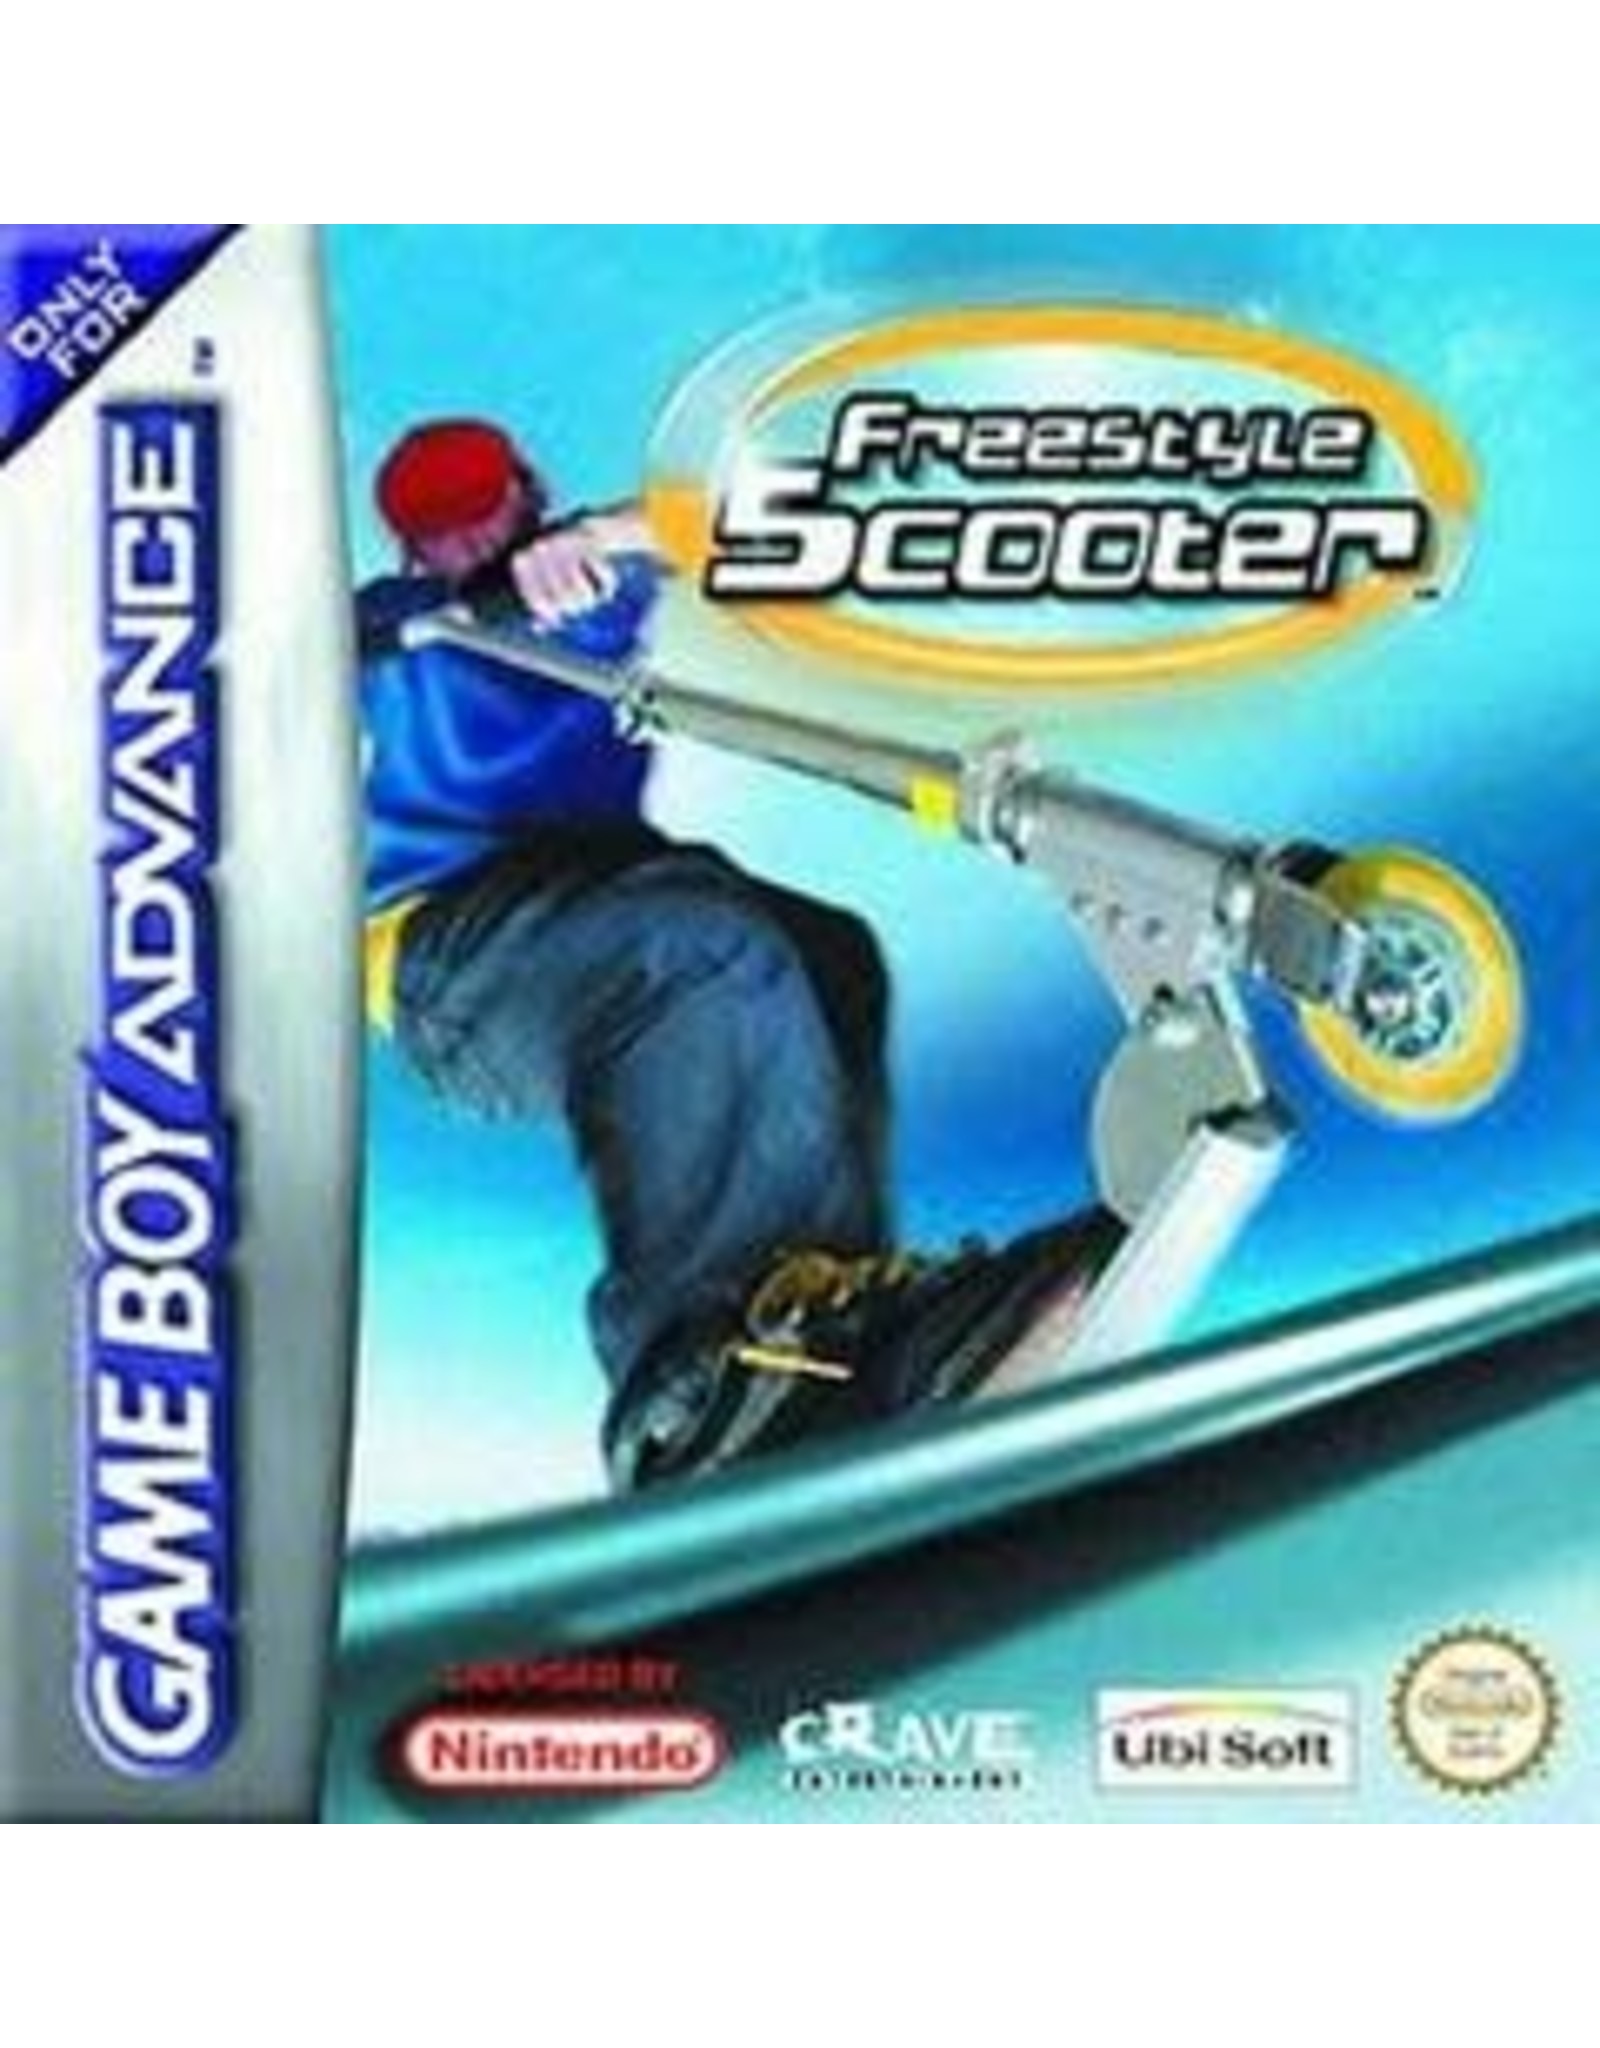 Game Boy Advance Freestyle Scooter (Cart Only, PAL Import)